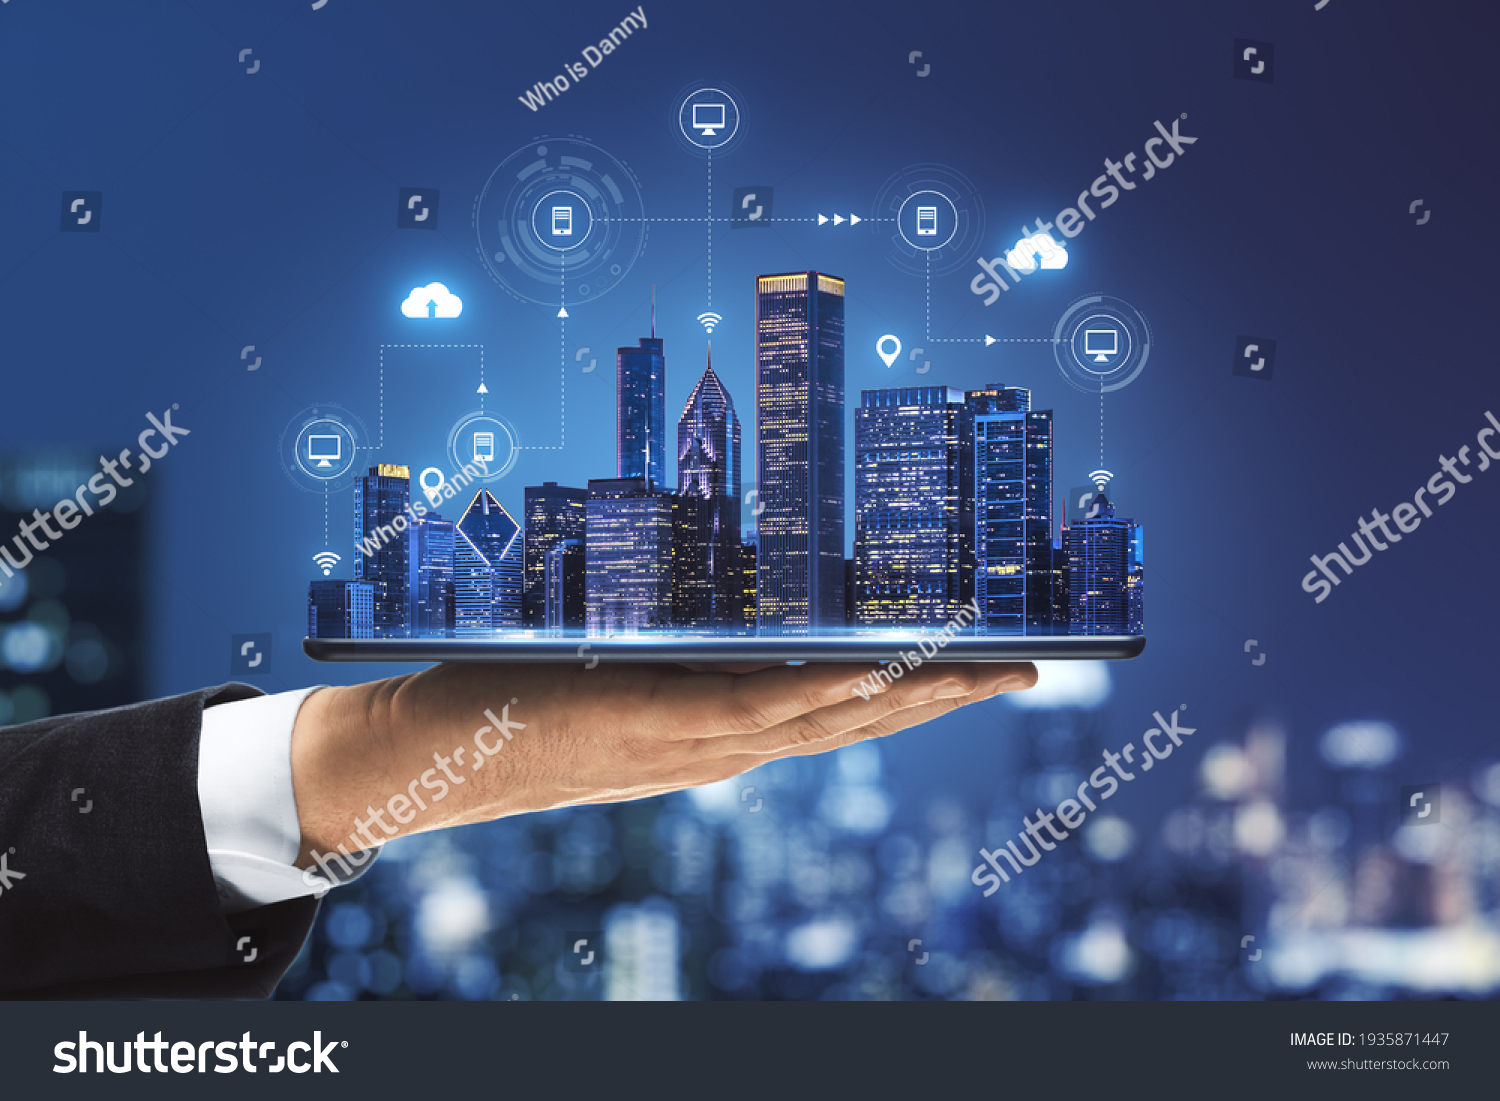 Smart city concept with real skyscrapers layout with glowing digital cloud technology icons on digital tablet screen that carrying businessman hand on blurry megapolis city background #1935871447